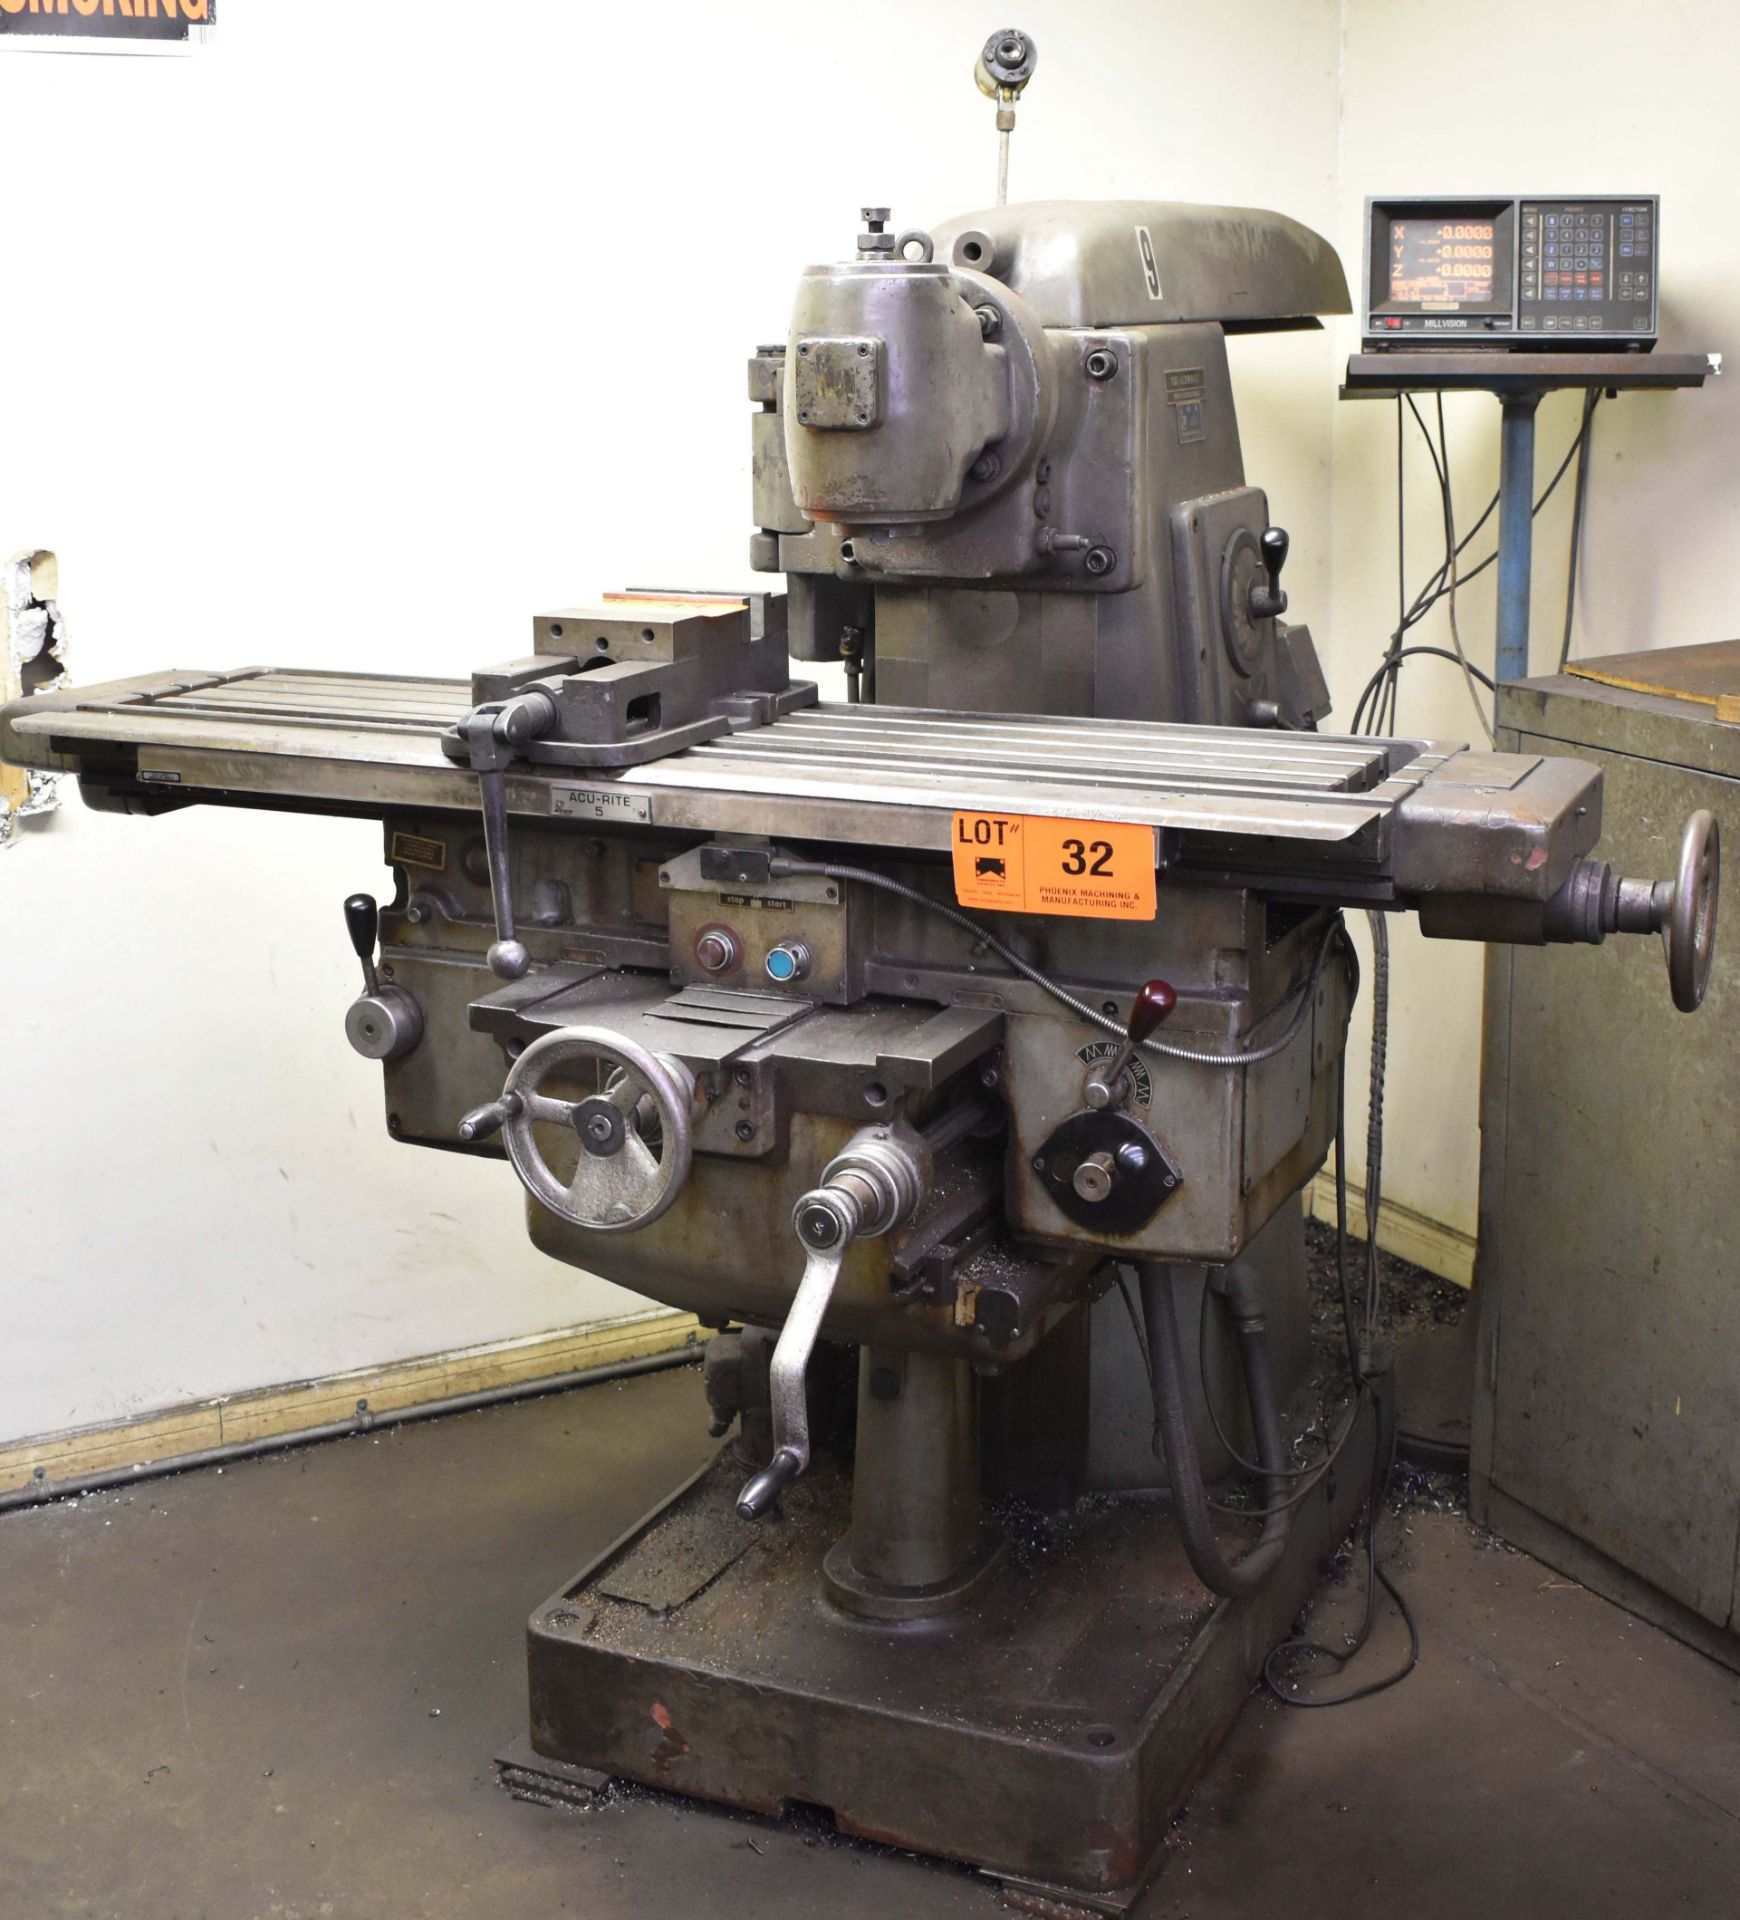 TOS FA3AH UNIVERSAL MILLING MACHINE WITH 54"X12" TABLE, SPEEDS TO 2000 RPM, ACU-RITE 5 SCALES,